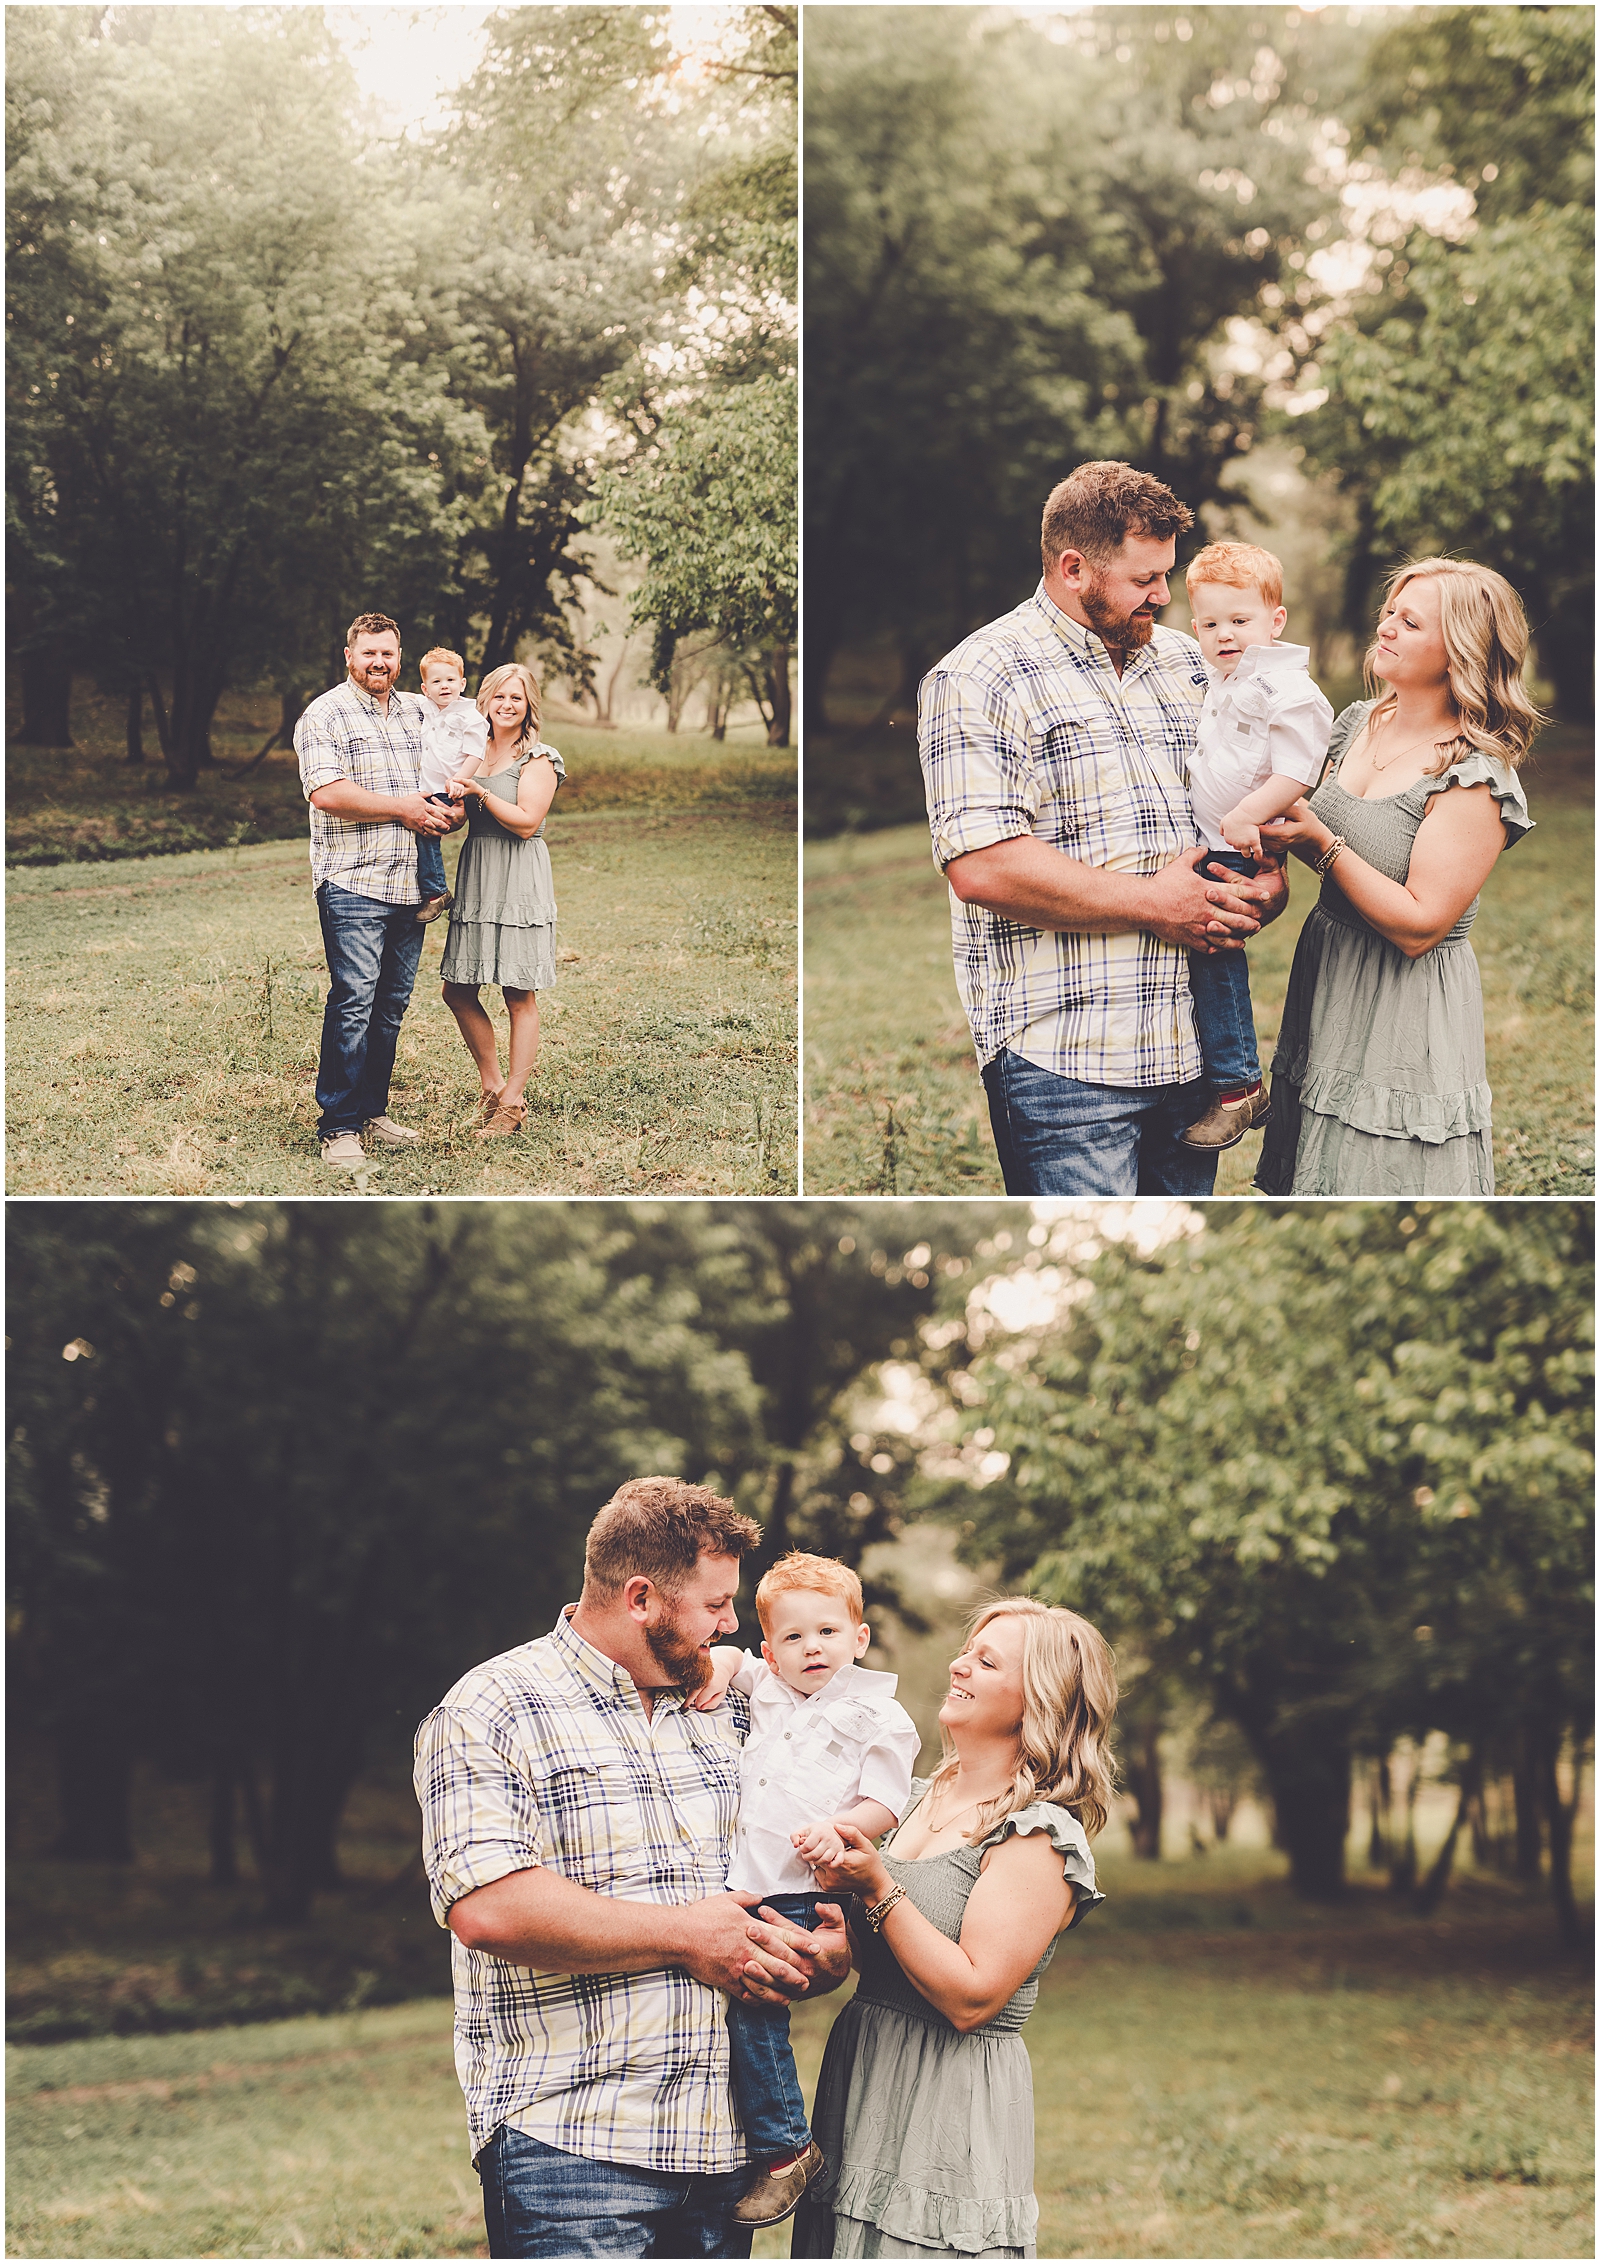 Summer farm family session in Watseka with the Wessels family and Kankakee County family photographer Kara Evans Photographer.